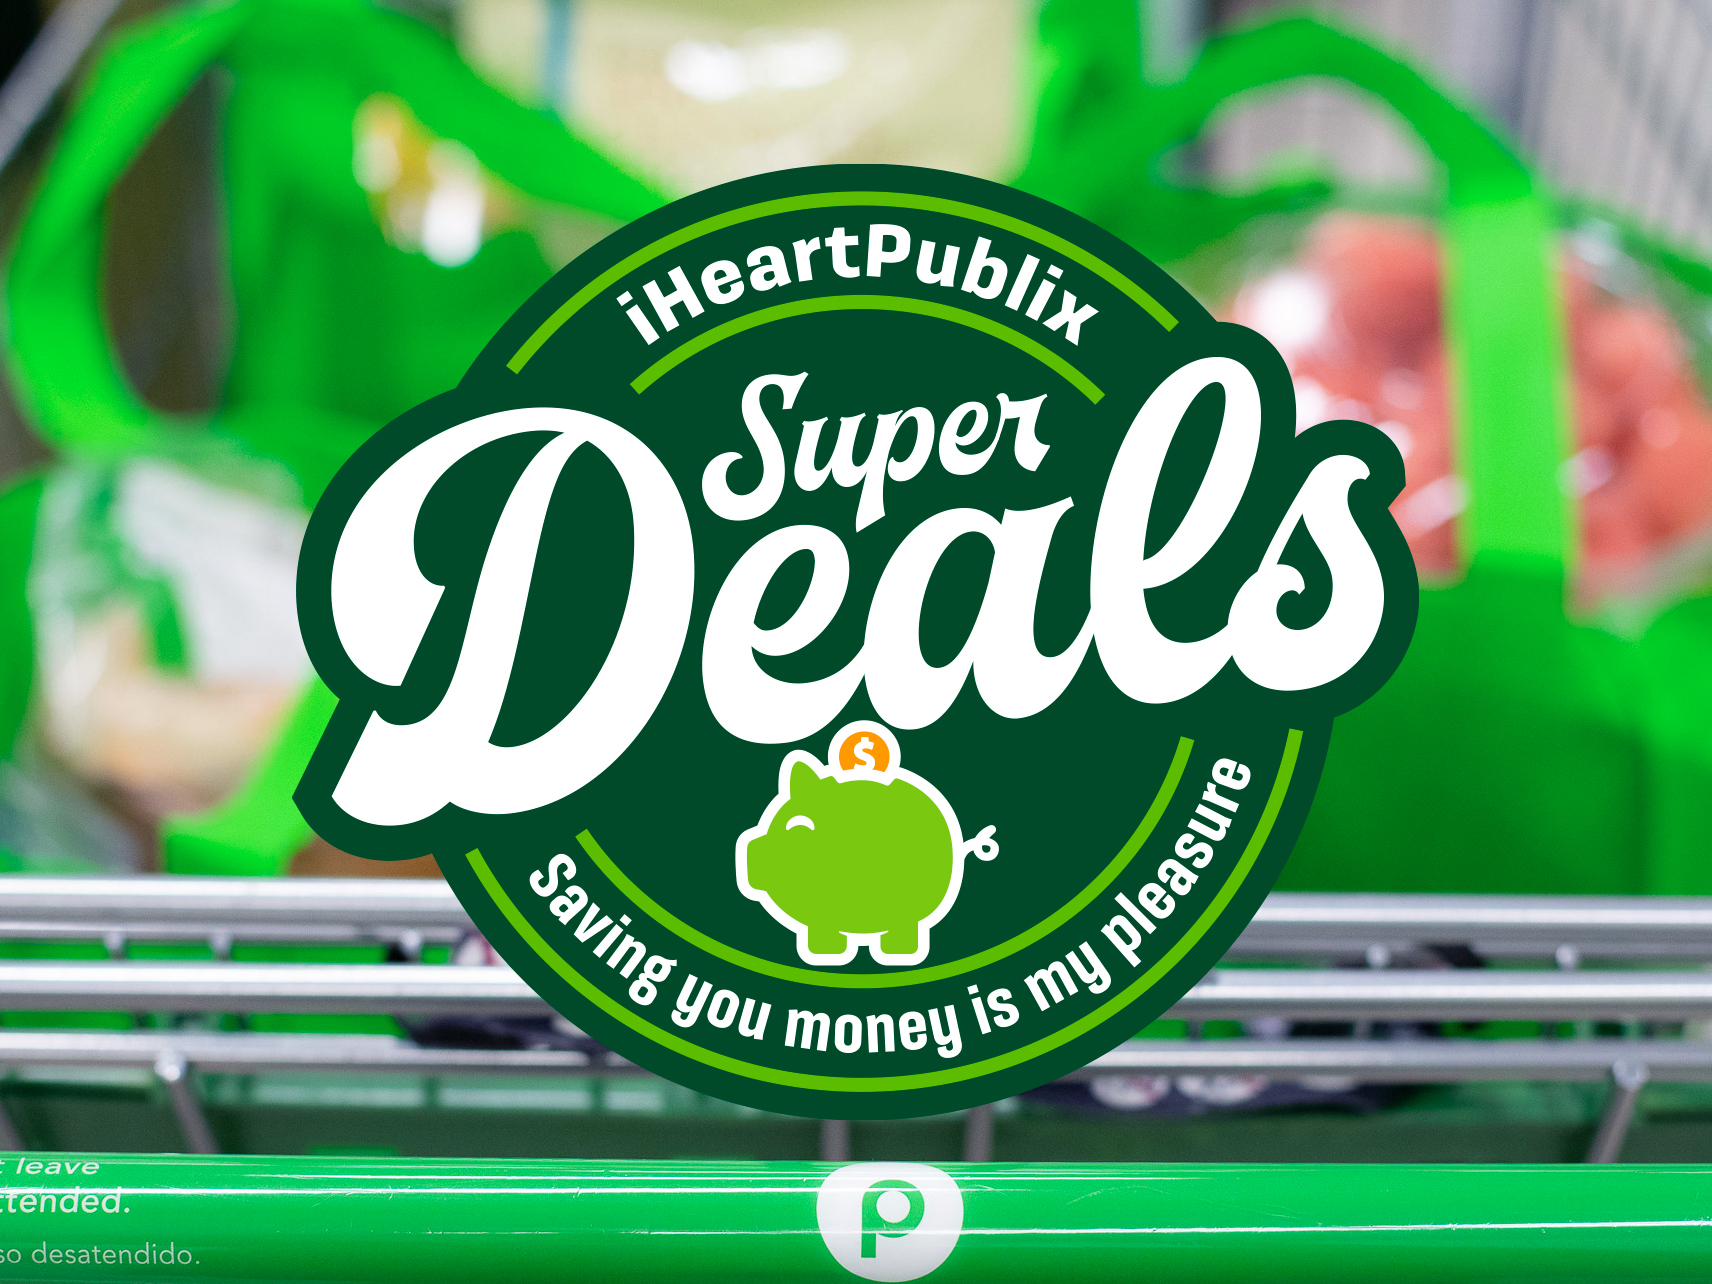 Publix Super Deals Week Of 2/2 to 2/8 (2/1 to 2/7 For Some) - iHeartPublix